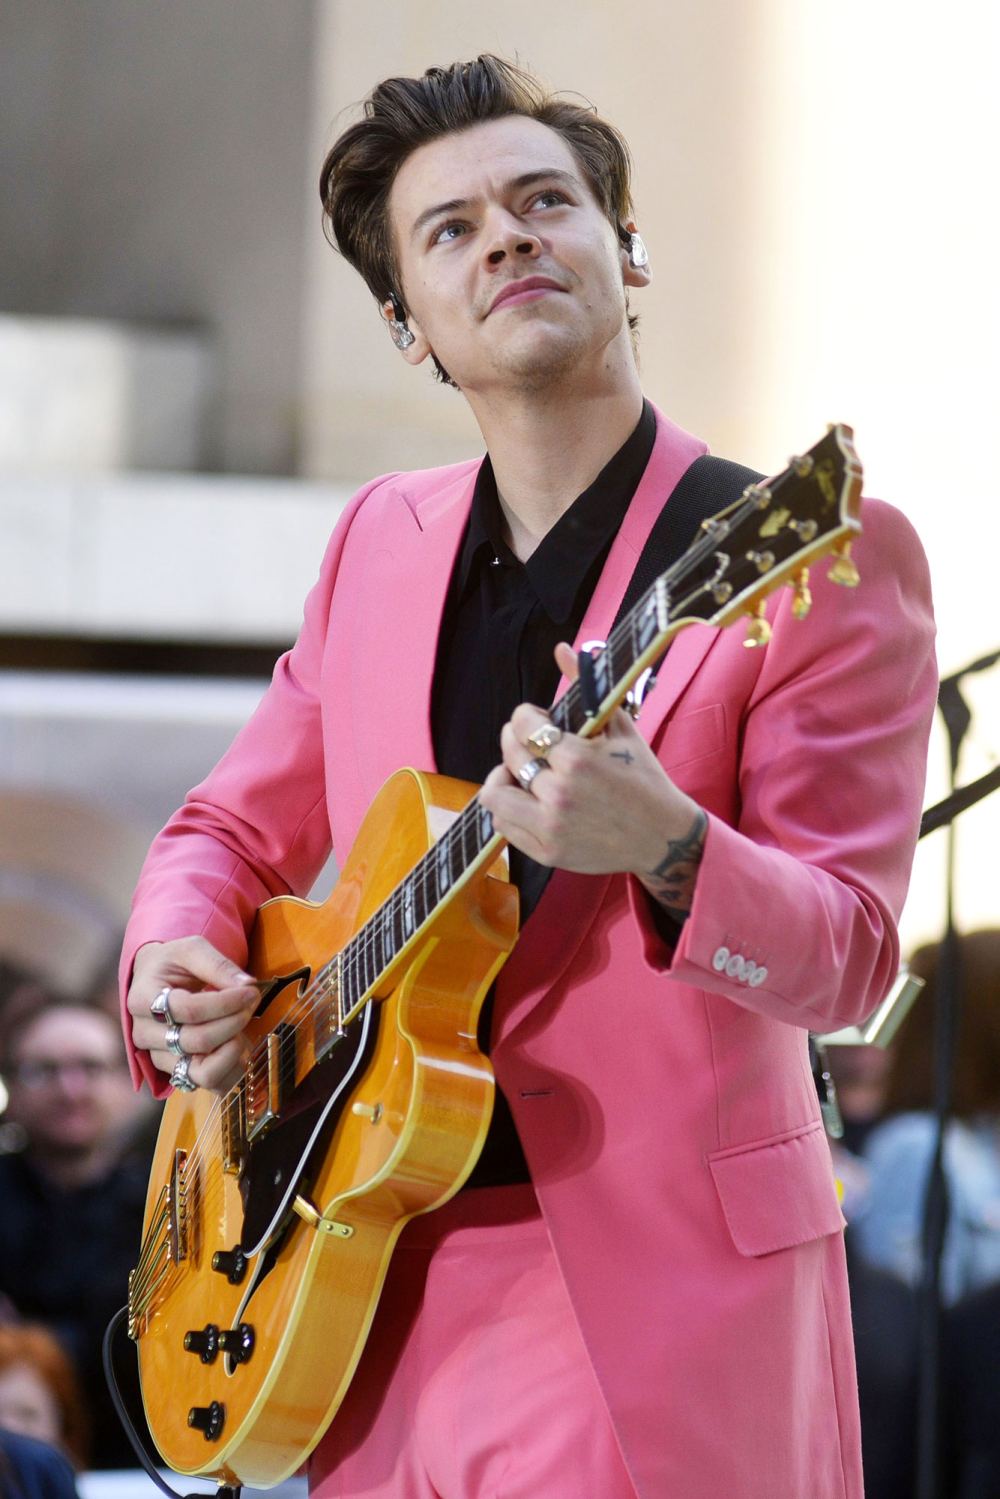 Harry-Styles-One-Direction-Pink-Suit